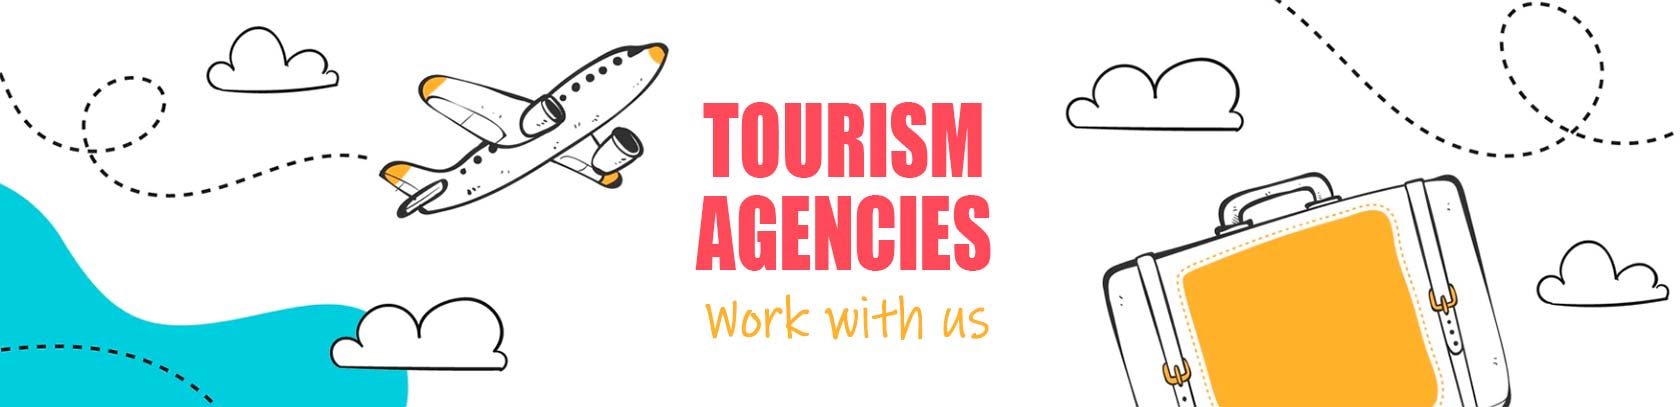 Opportunity for Tourism Agencies